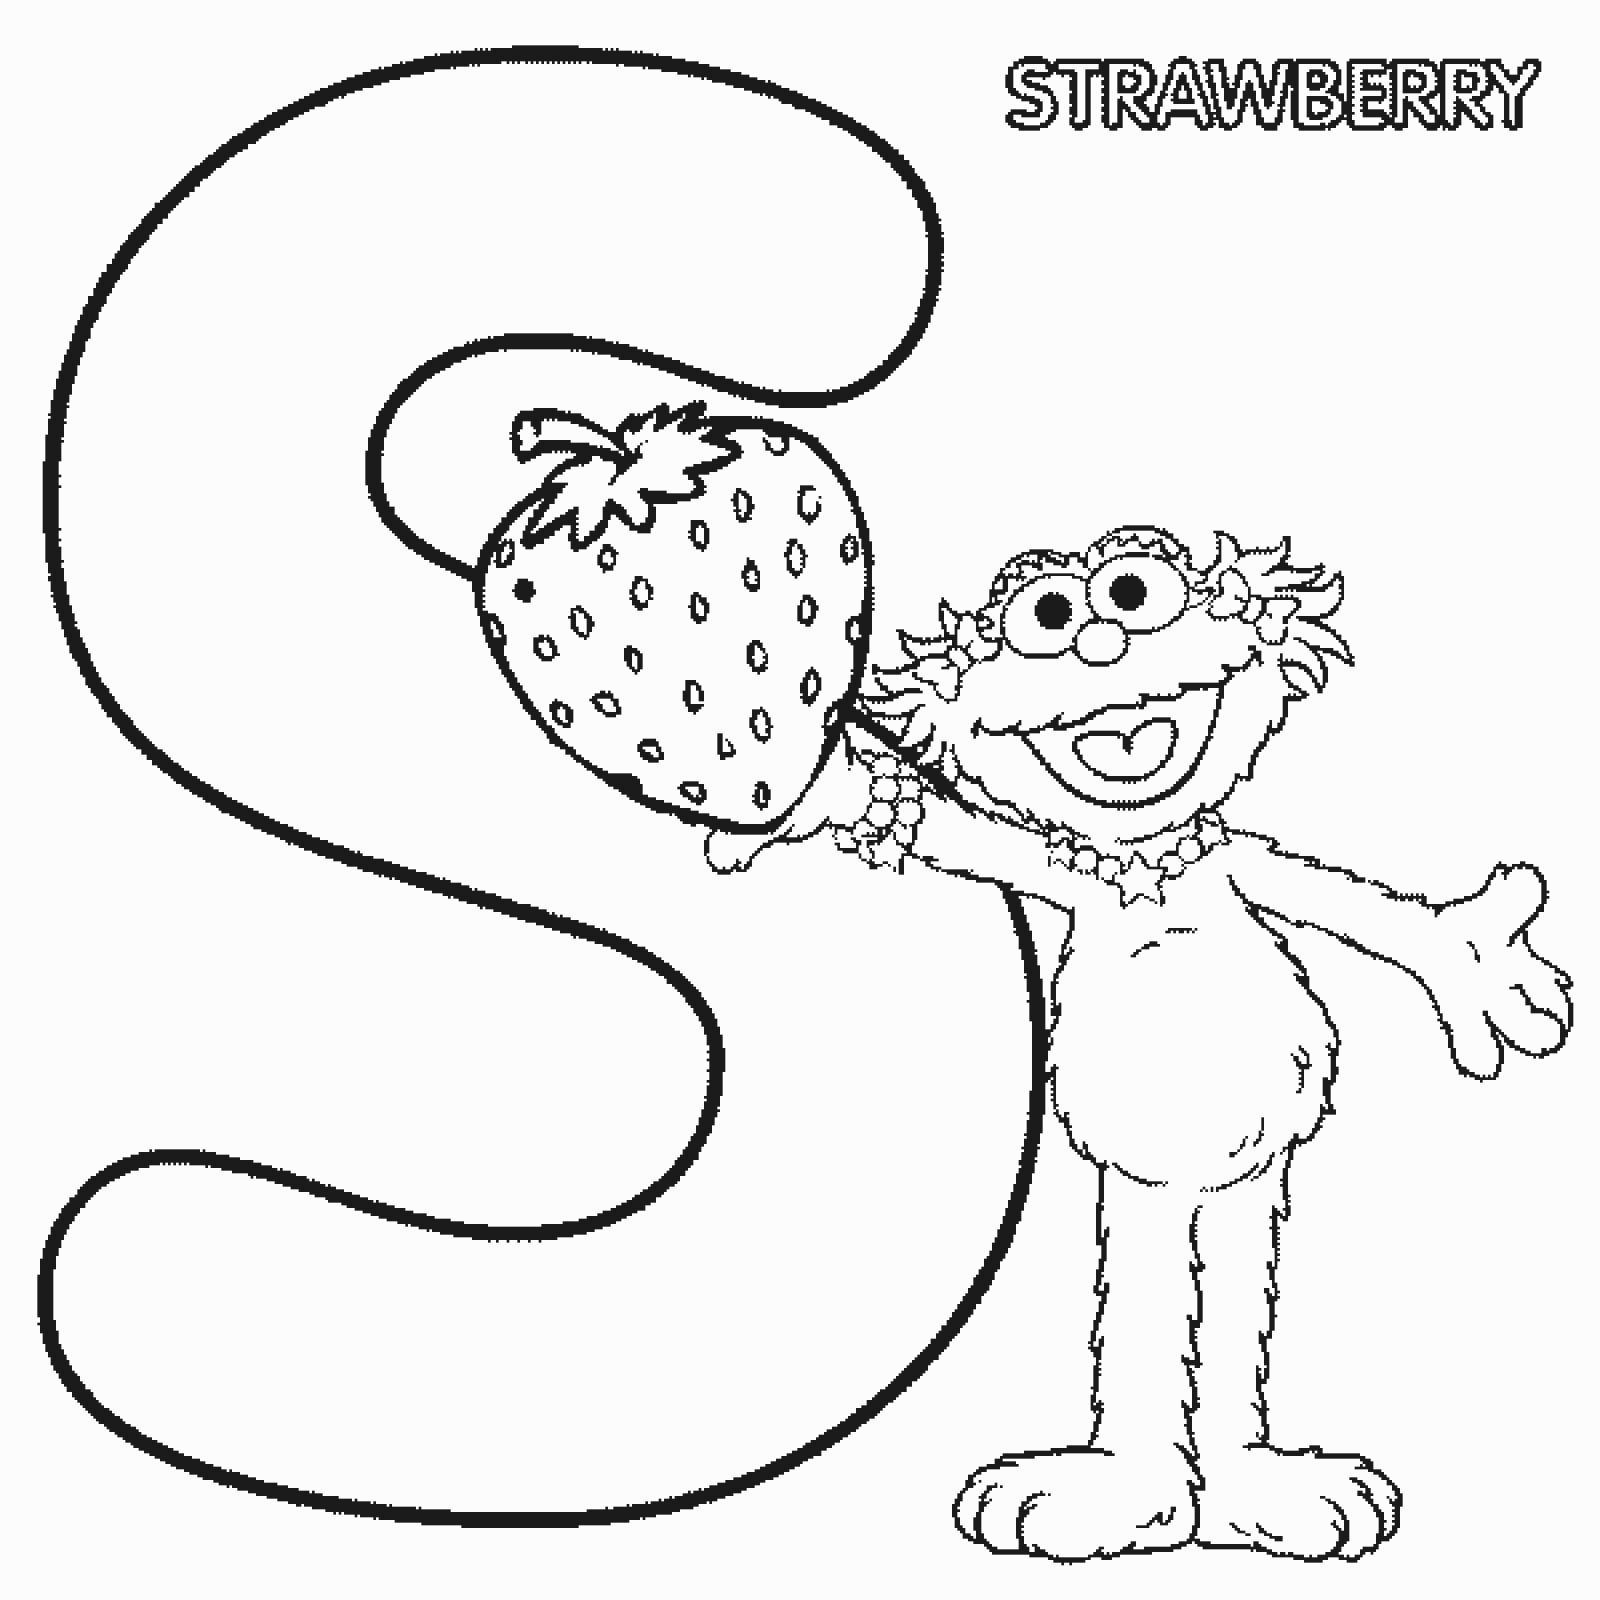 Letter S Coloring Page - Coloring Pages for Kids and for Adults